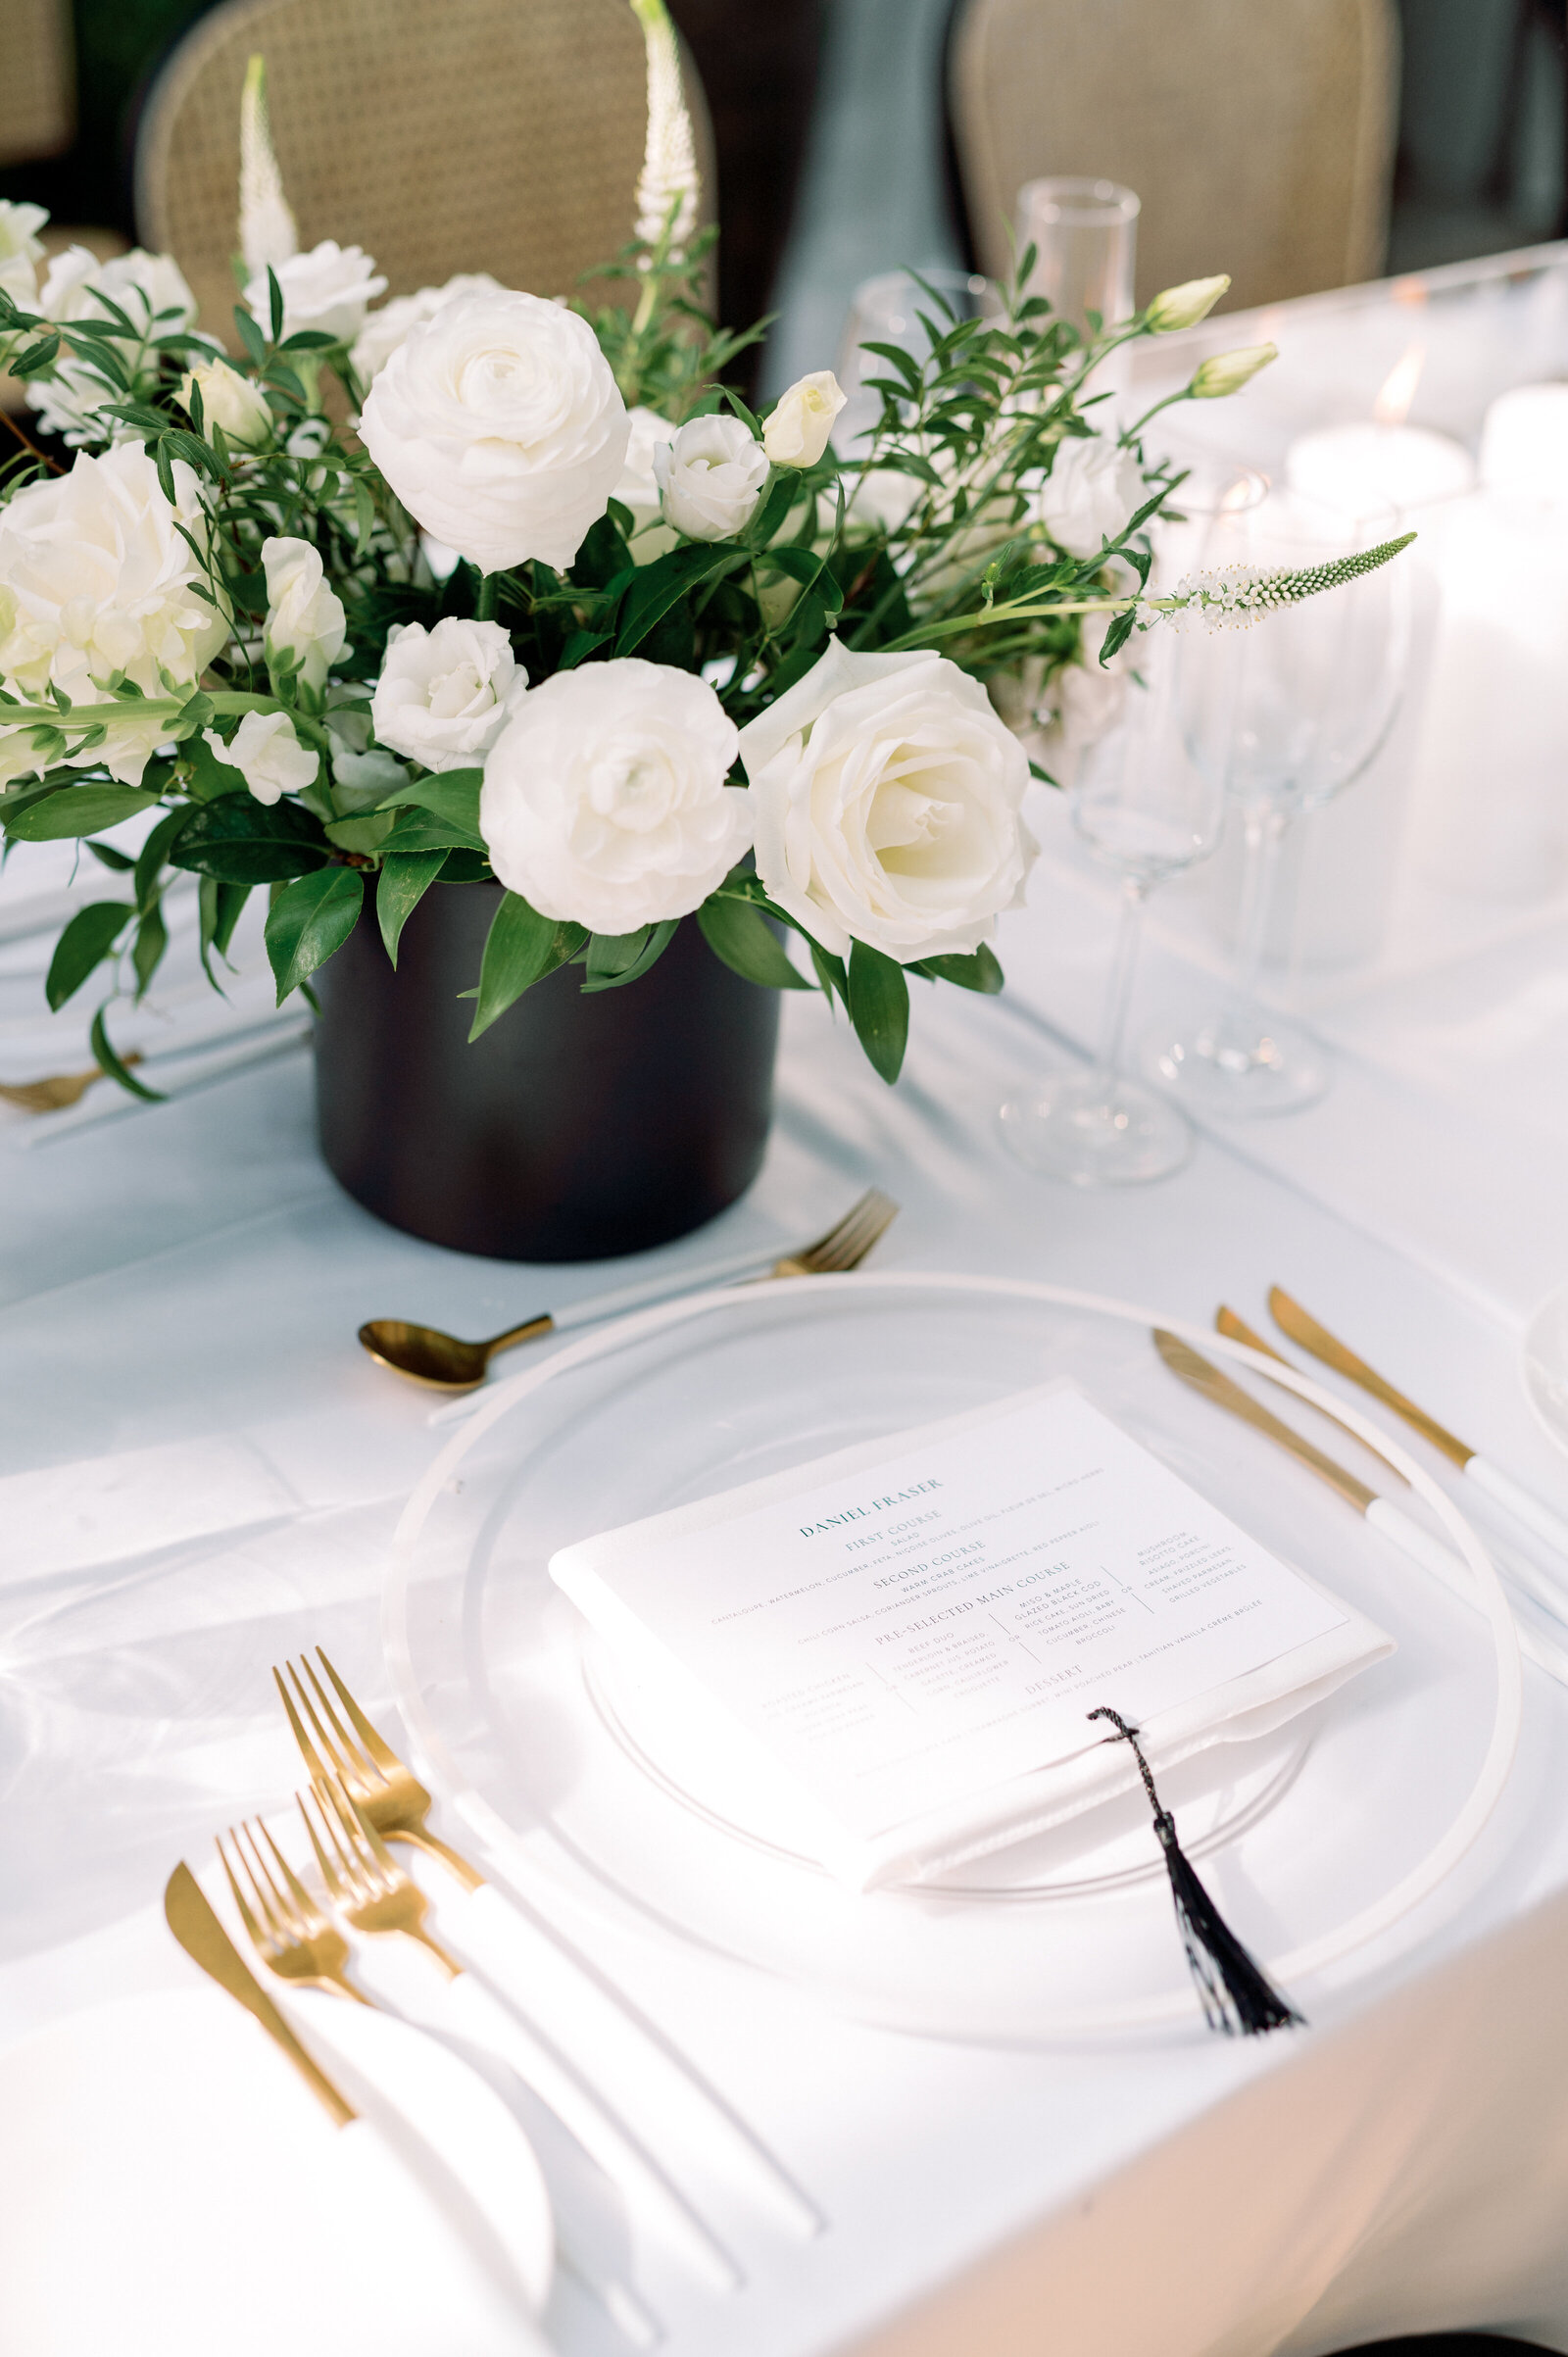 Modern Timeless Romantic Black and Gold White Roses Tablescape Reception Decor at Graydon Hall Manor Toronto Wedding | Jacqueline James Photography